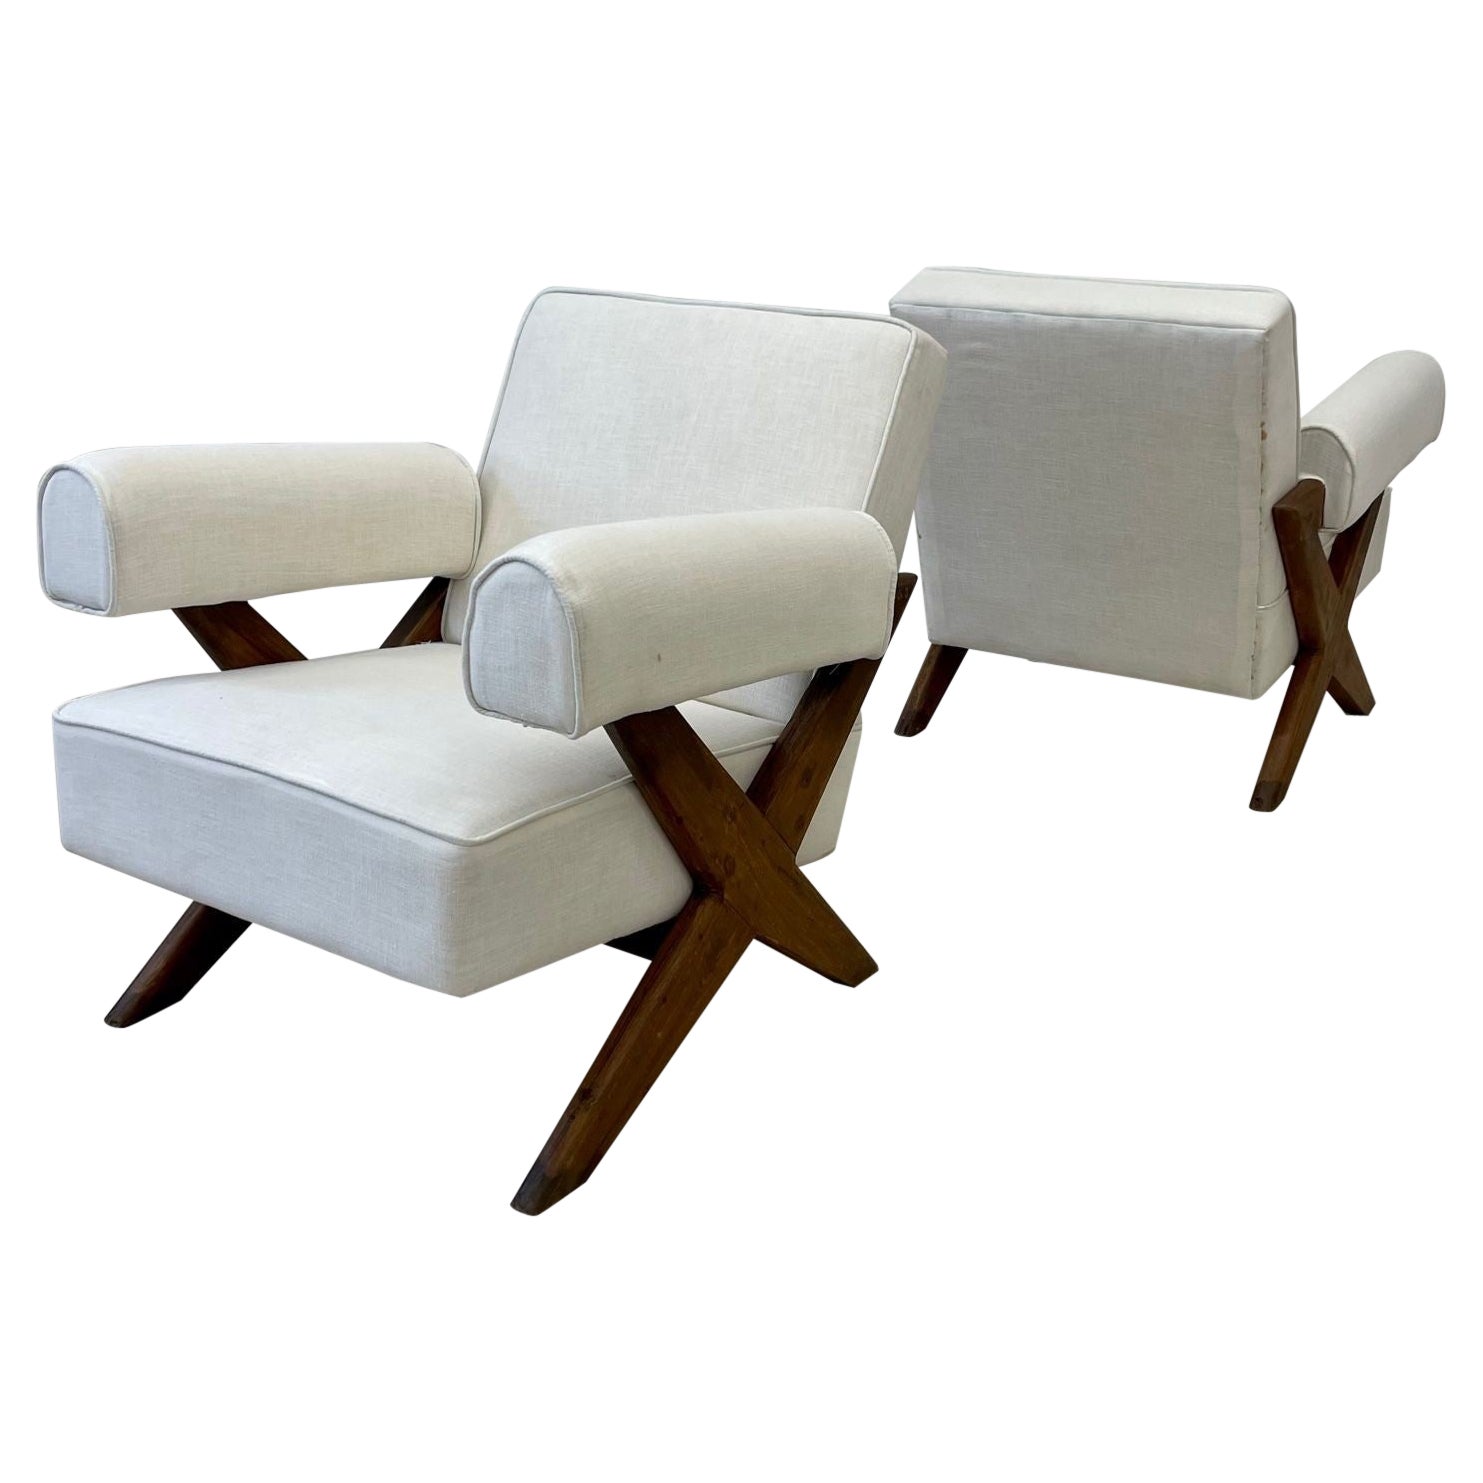 Pierre Jeanneret, French Mid-Century Modern, Lounge Chairs, Chandigarh, 1960s For Sale